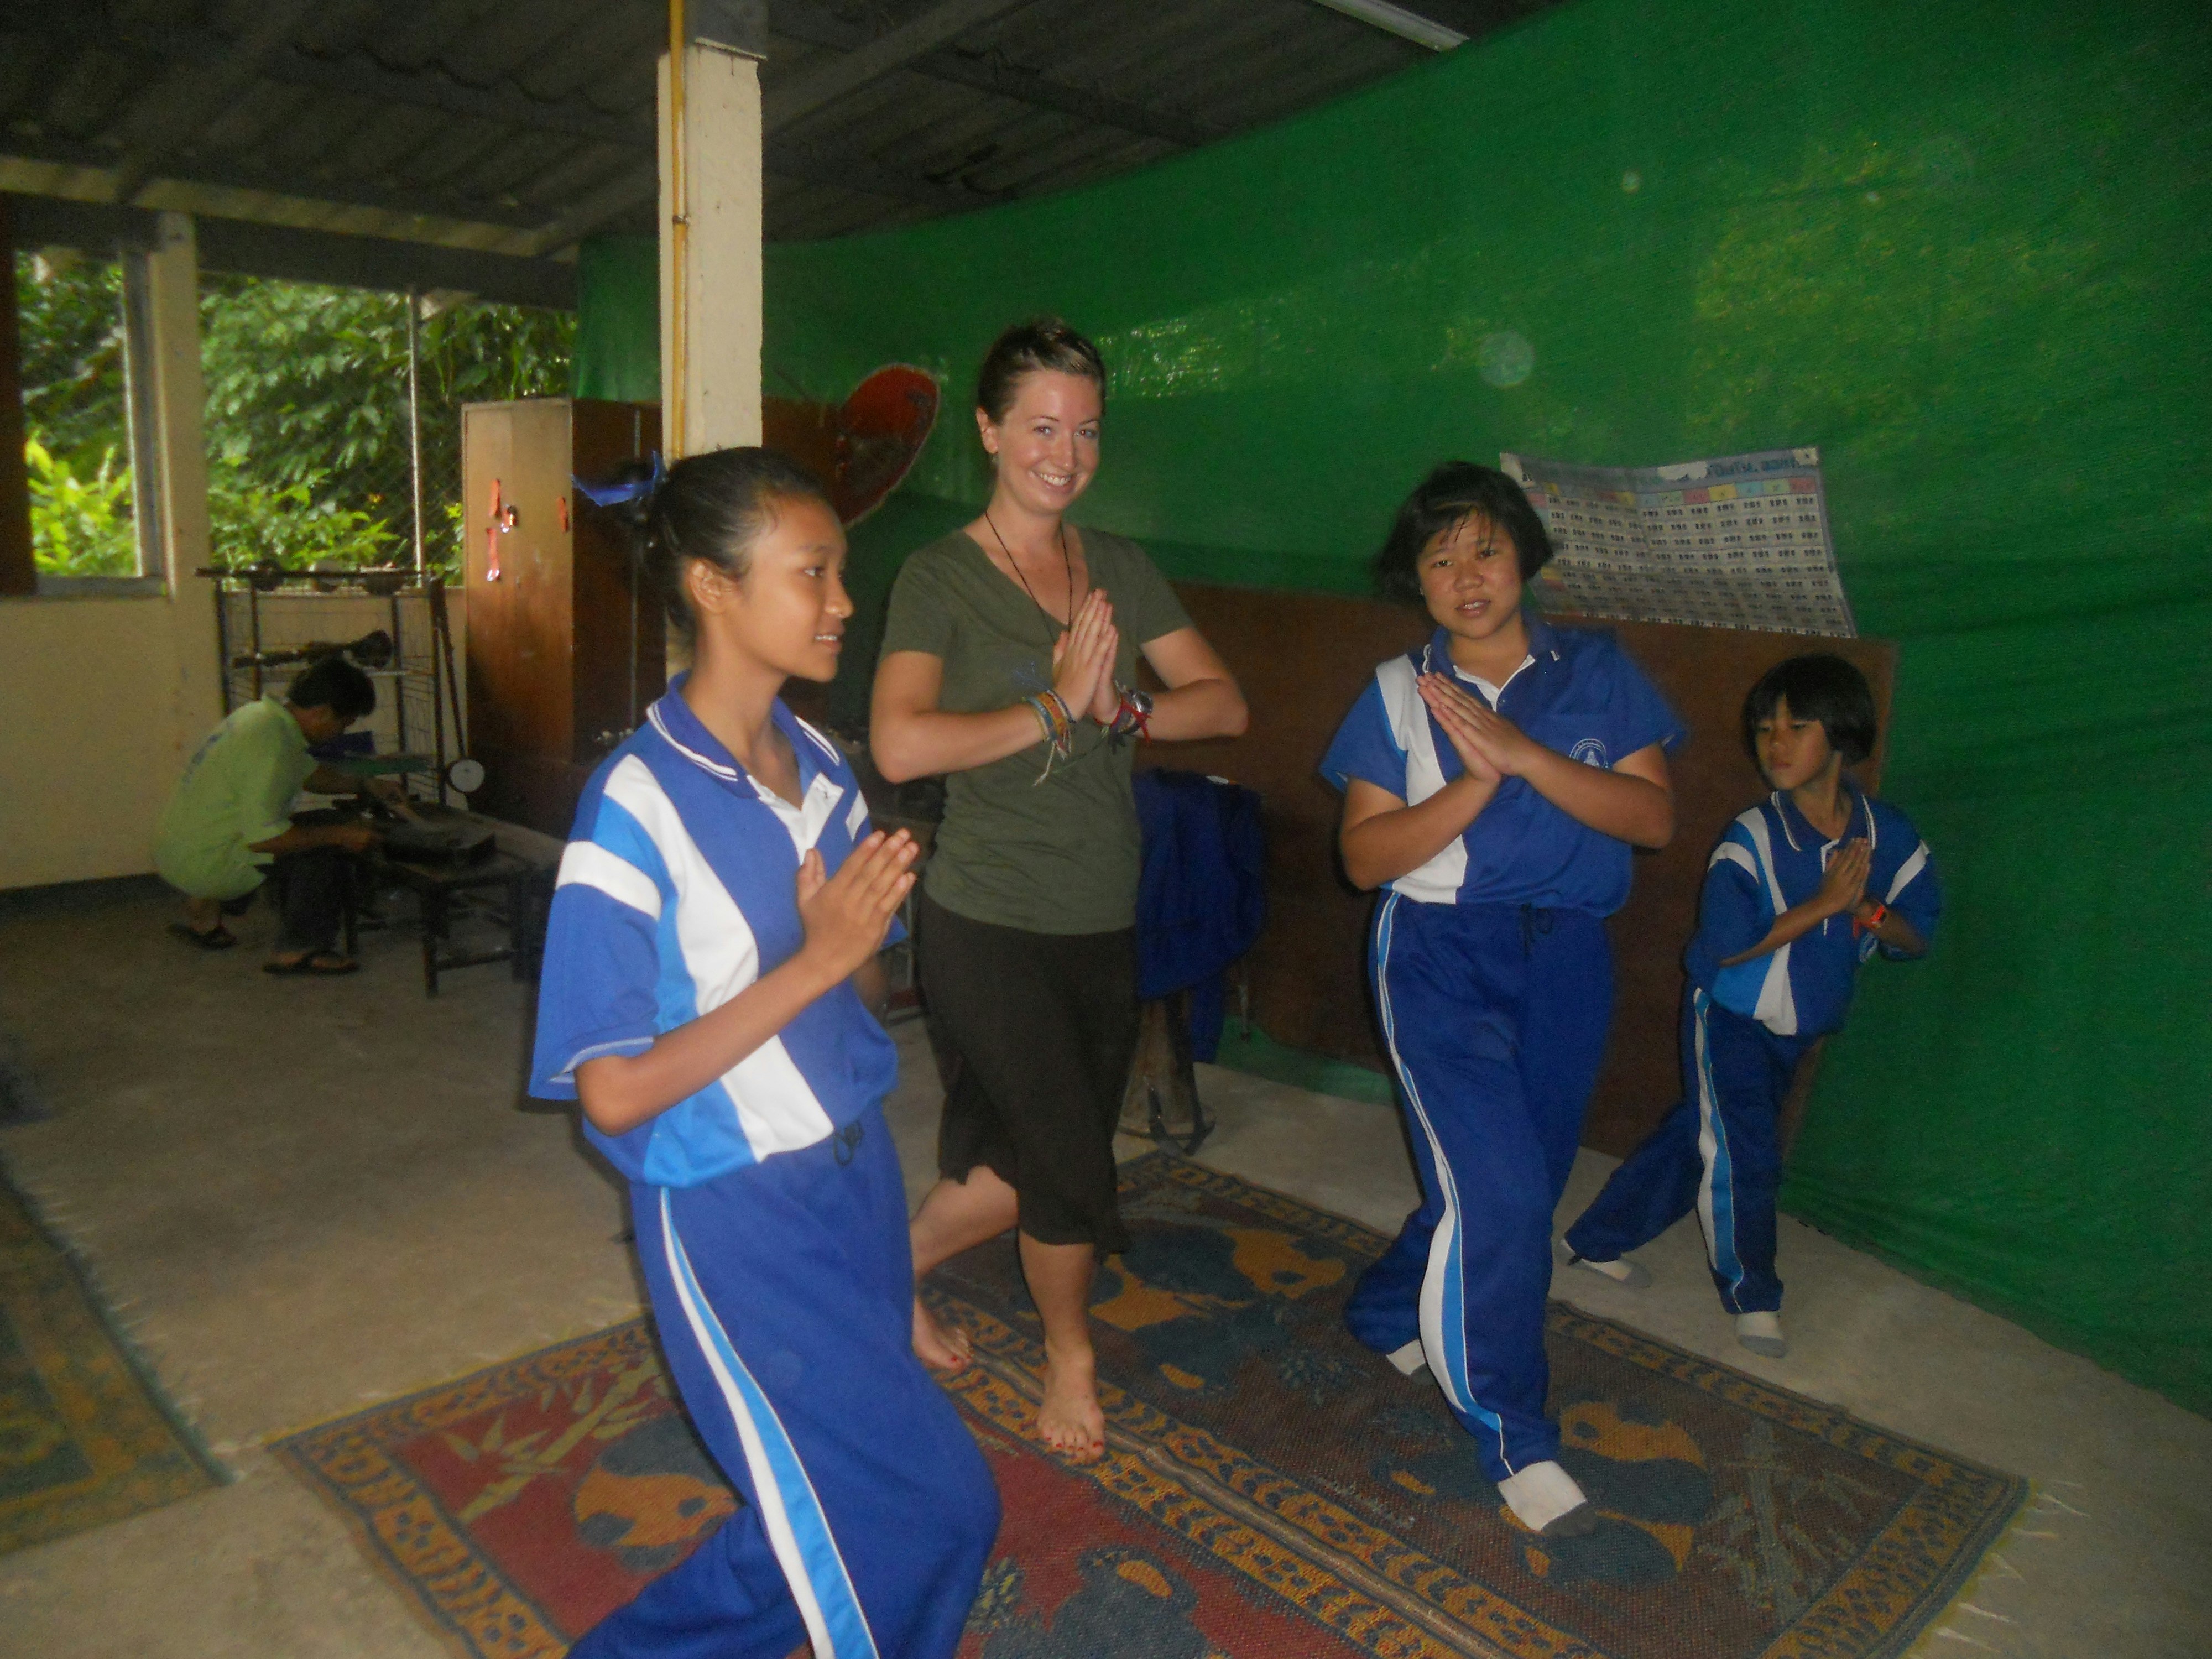 Environmental writer Britany Robinson stands with three Thai girls of varying ages. The girls are in blue track suits with their palms pressed together. Britany is in a green top and black pants striking a similar pose.